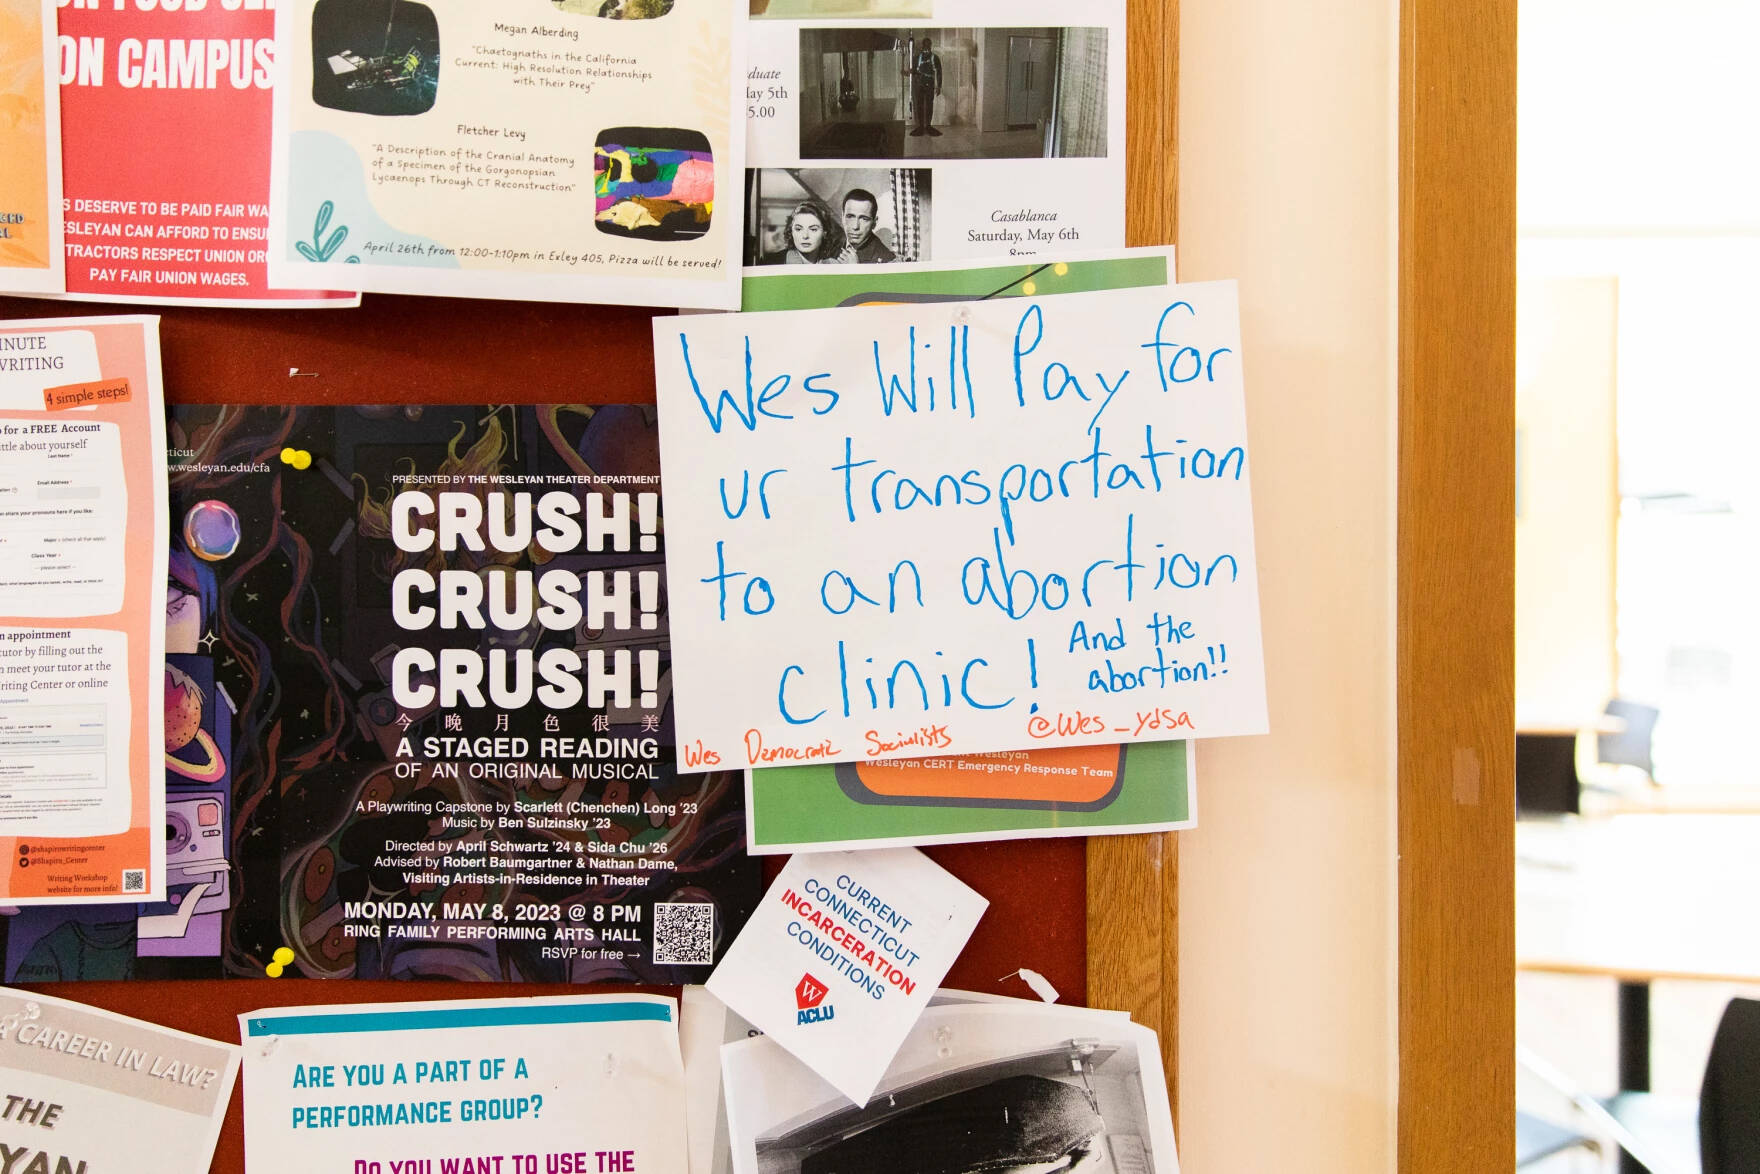 A sign posted inside the Usdan University Center informs the student body that the University agreed to meet their demands to cover healthcare costs related to abortion. (Greg Miller/Connecticut Public)